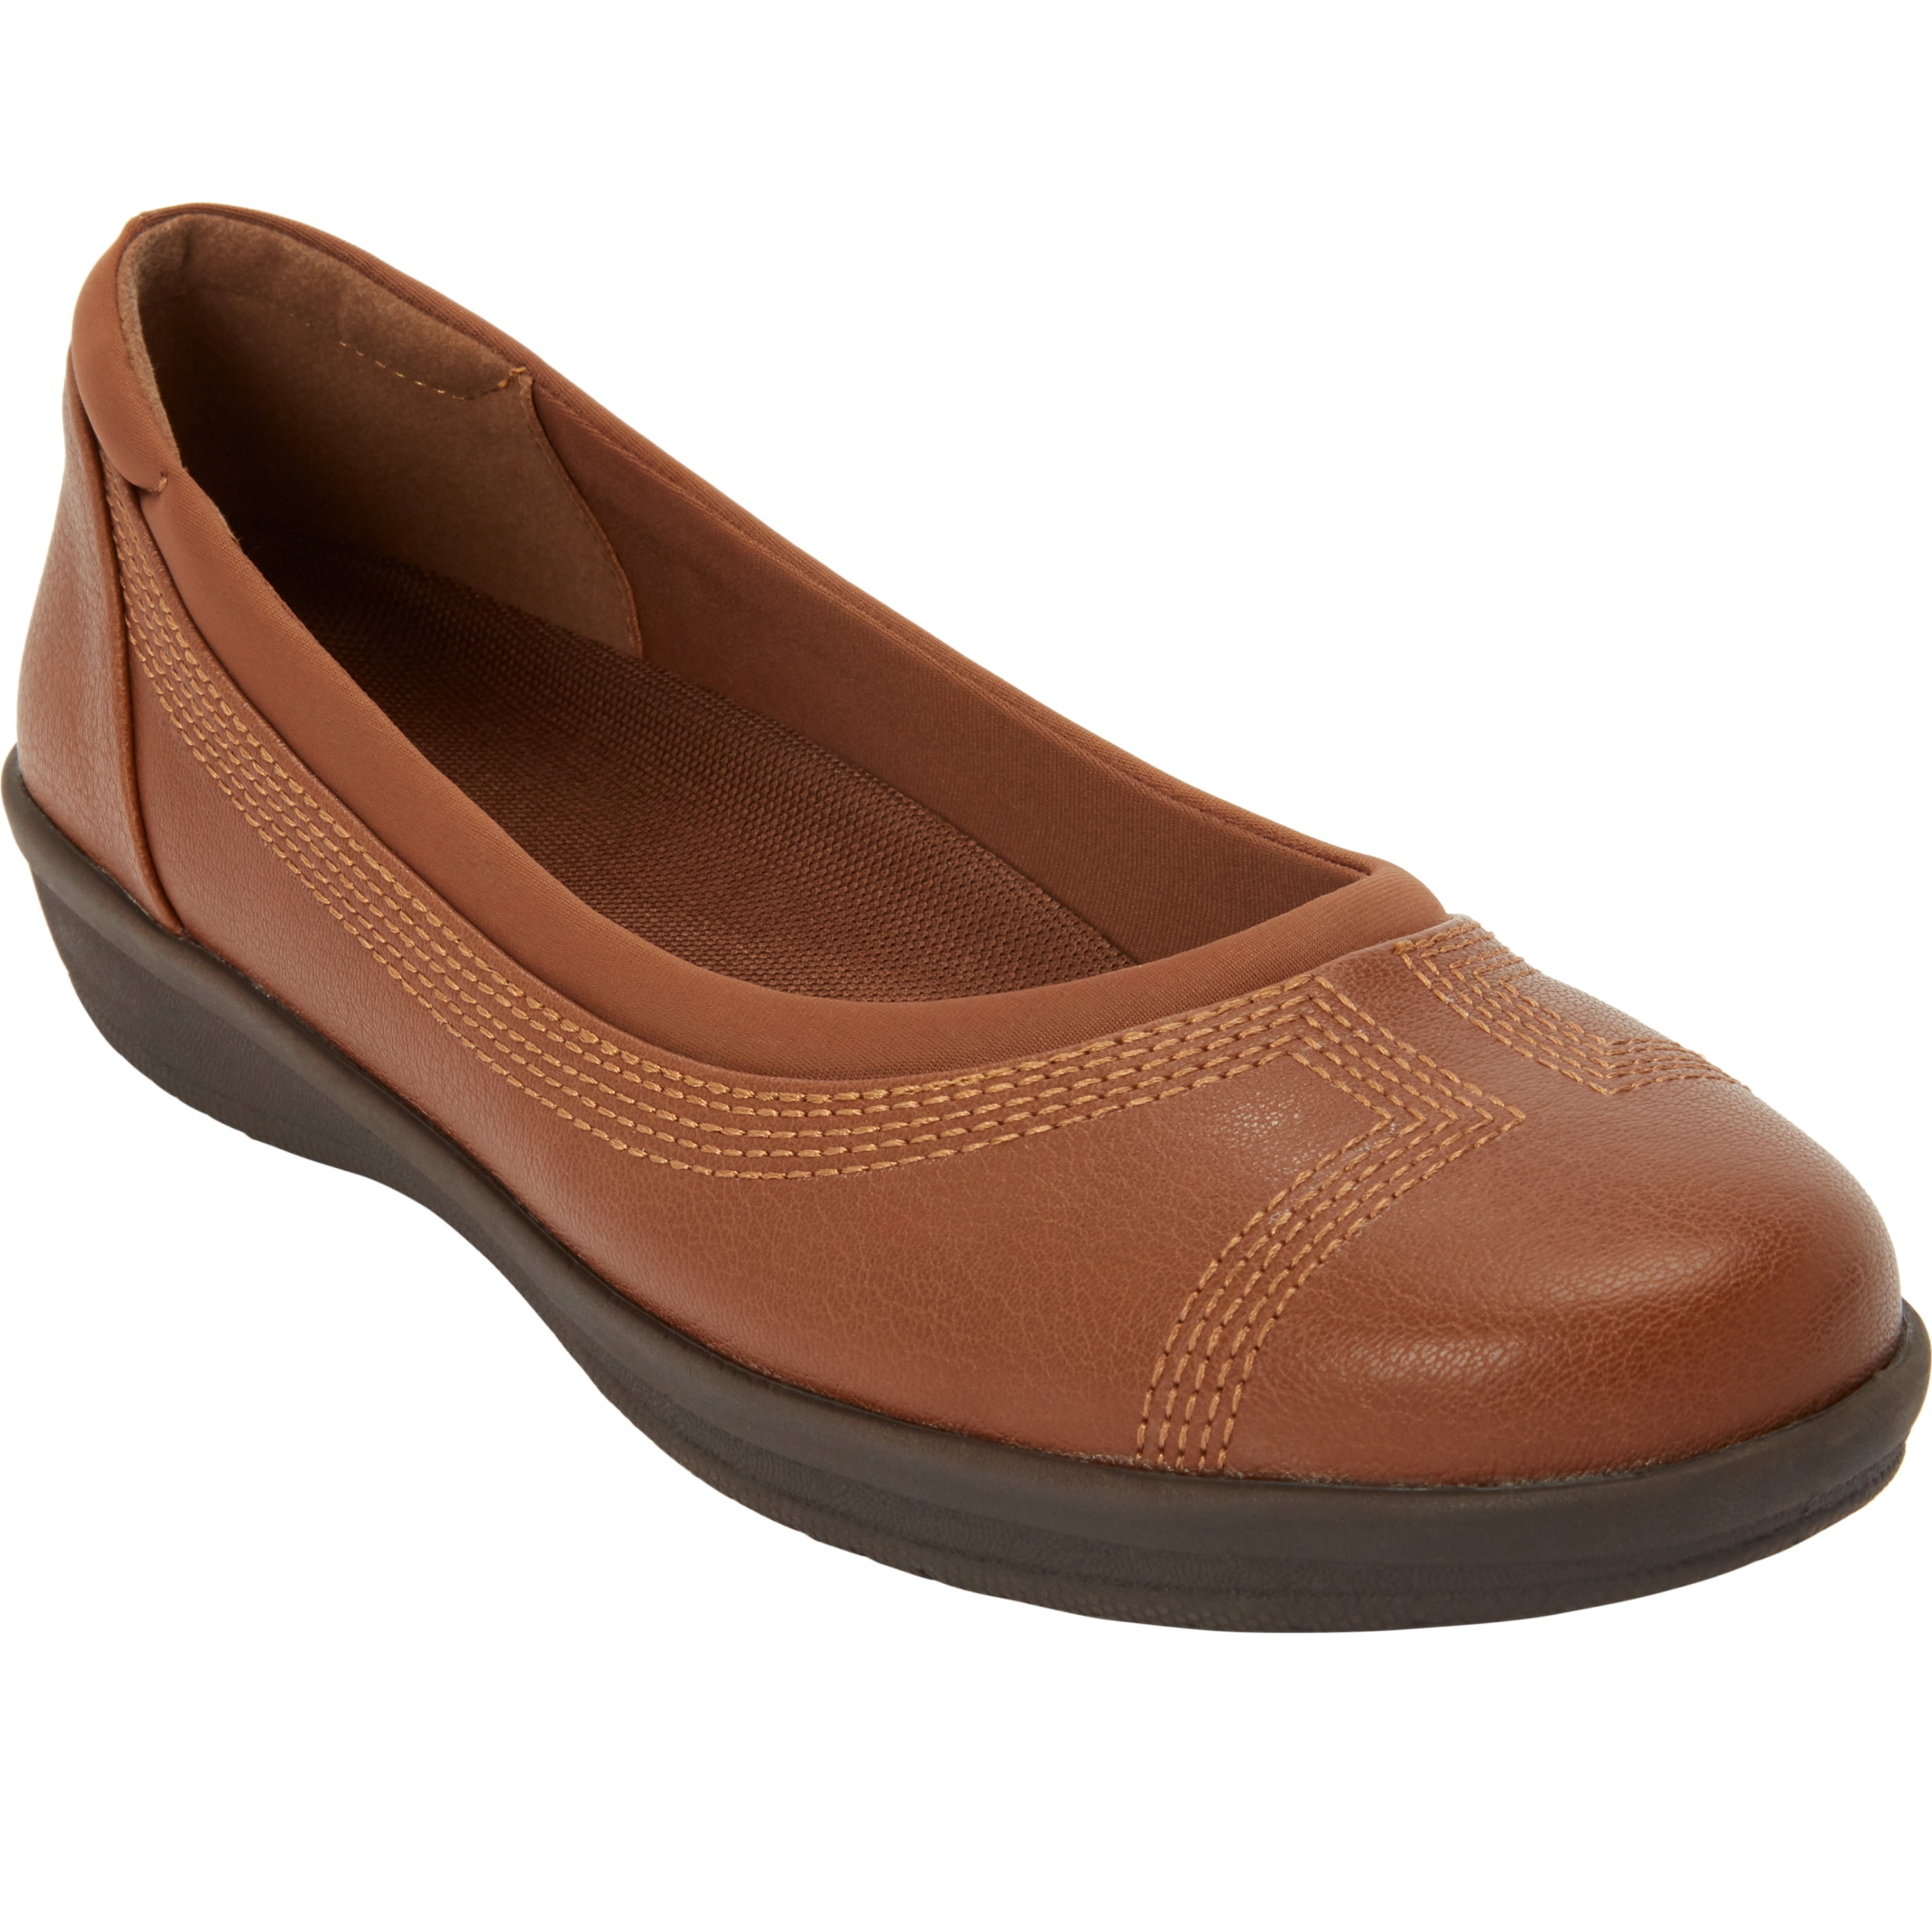 New without Box 9 WIDE ComfortView TAN NUDE PADDED WIDE Slip-on FLATS Shoes